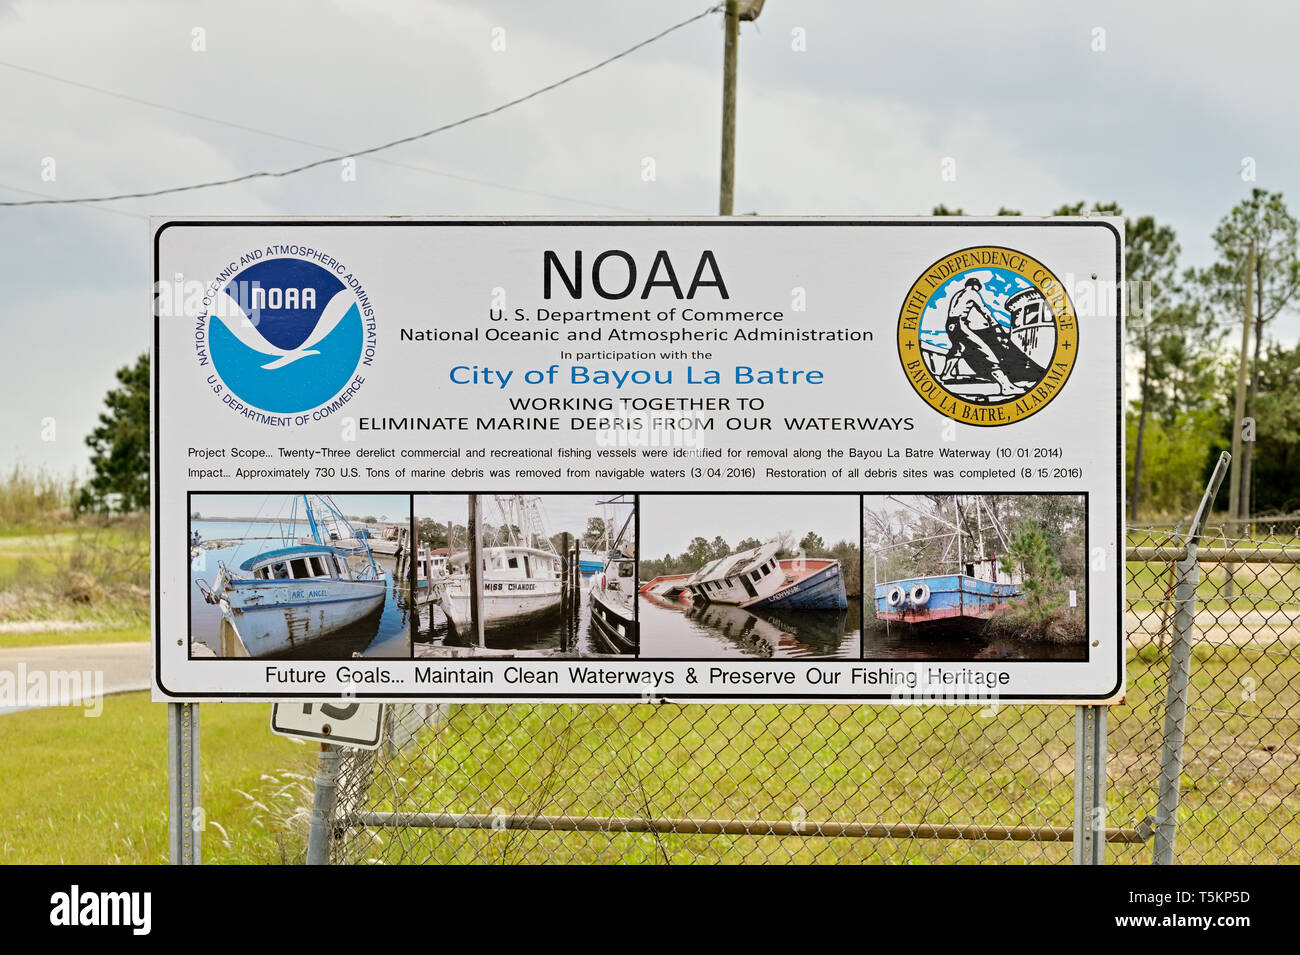 NOAA sign advising conservation to maintain clean waterways and keep marine debris out of the bayou and Mobile Bay, in Bayou La Batre Alabama, USA. Stock Photo